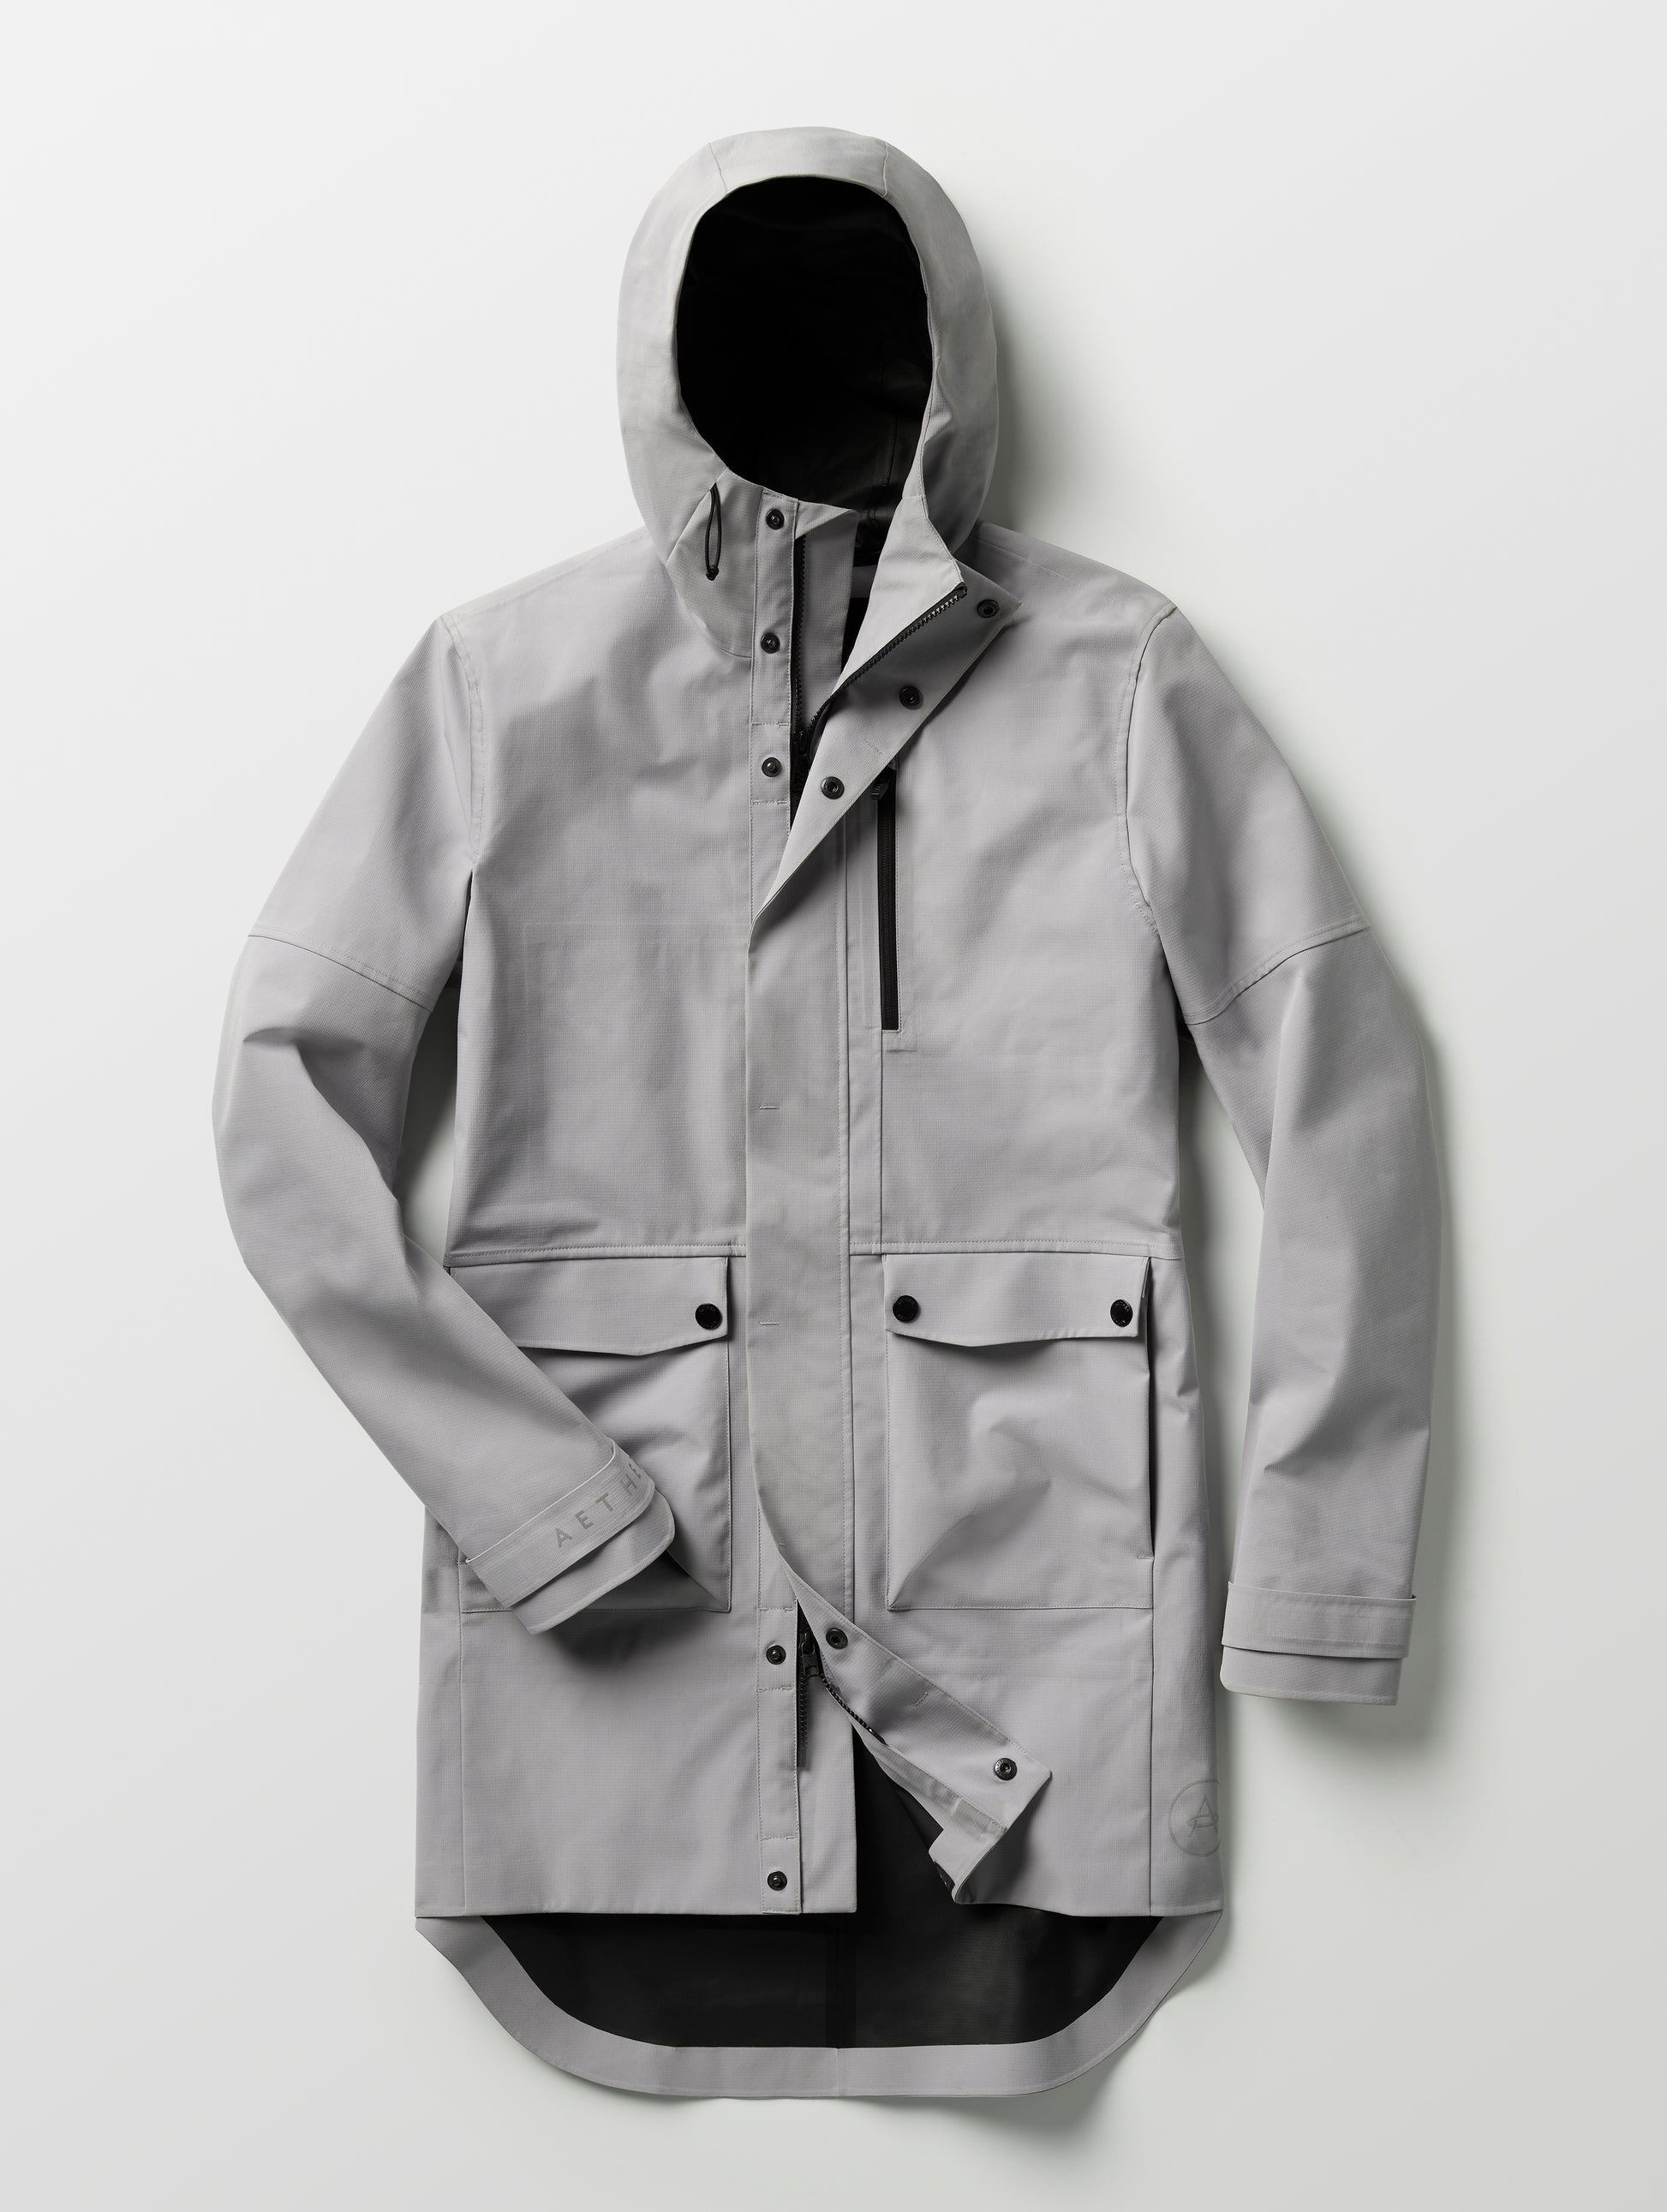 Grey men's rain jacket from AETHER Apparel